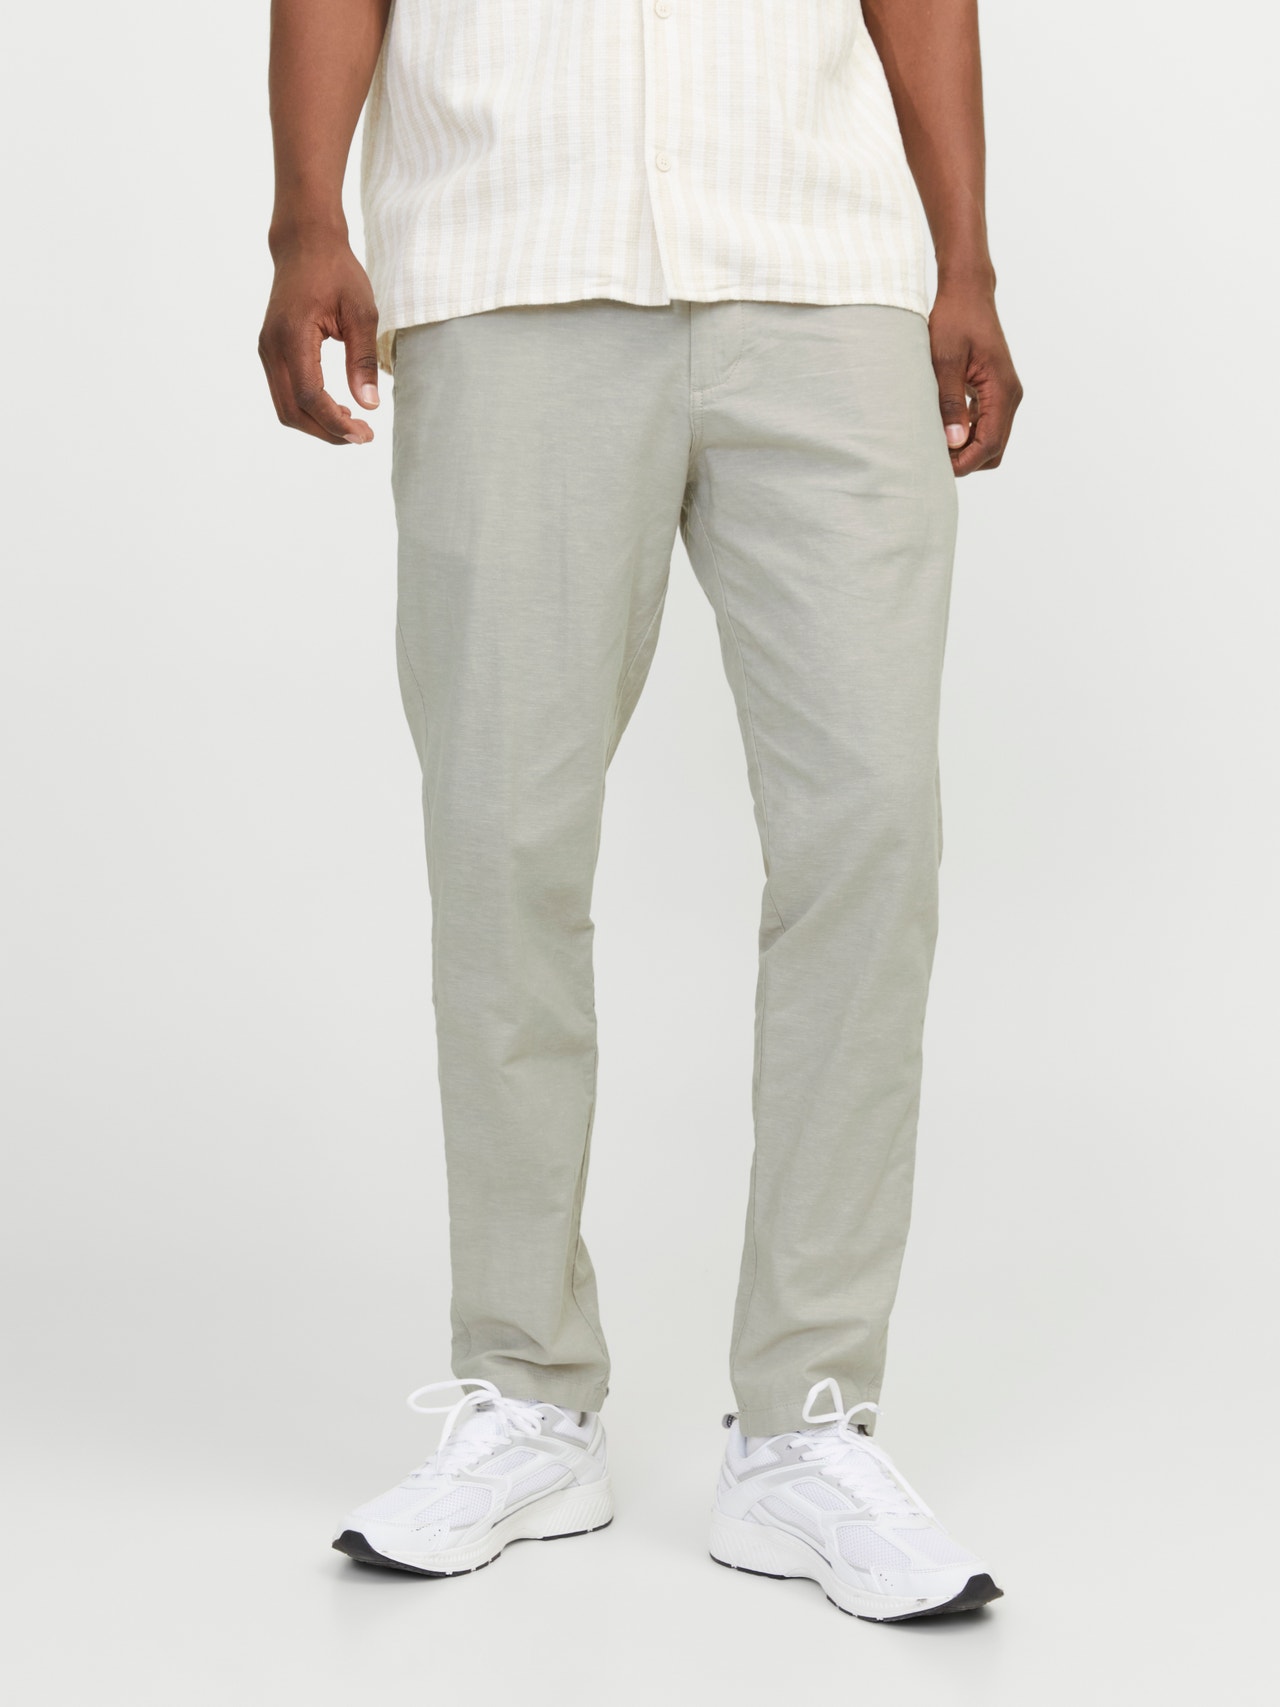 Jack & Jones Tapered Fit Chino trousers -Wrought Iron - 12248604